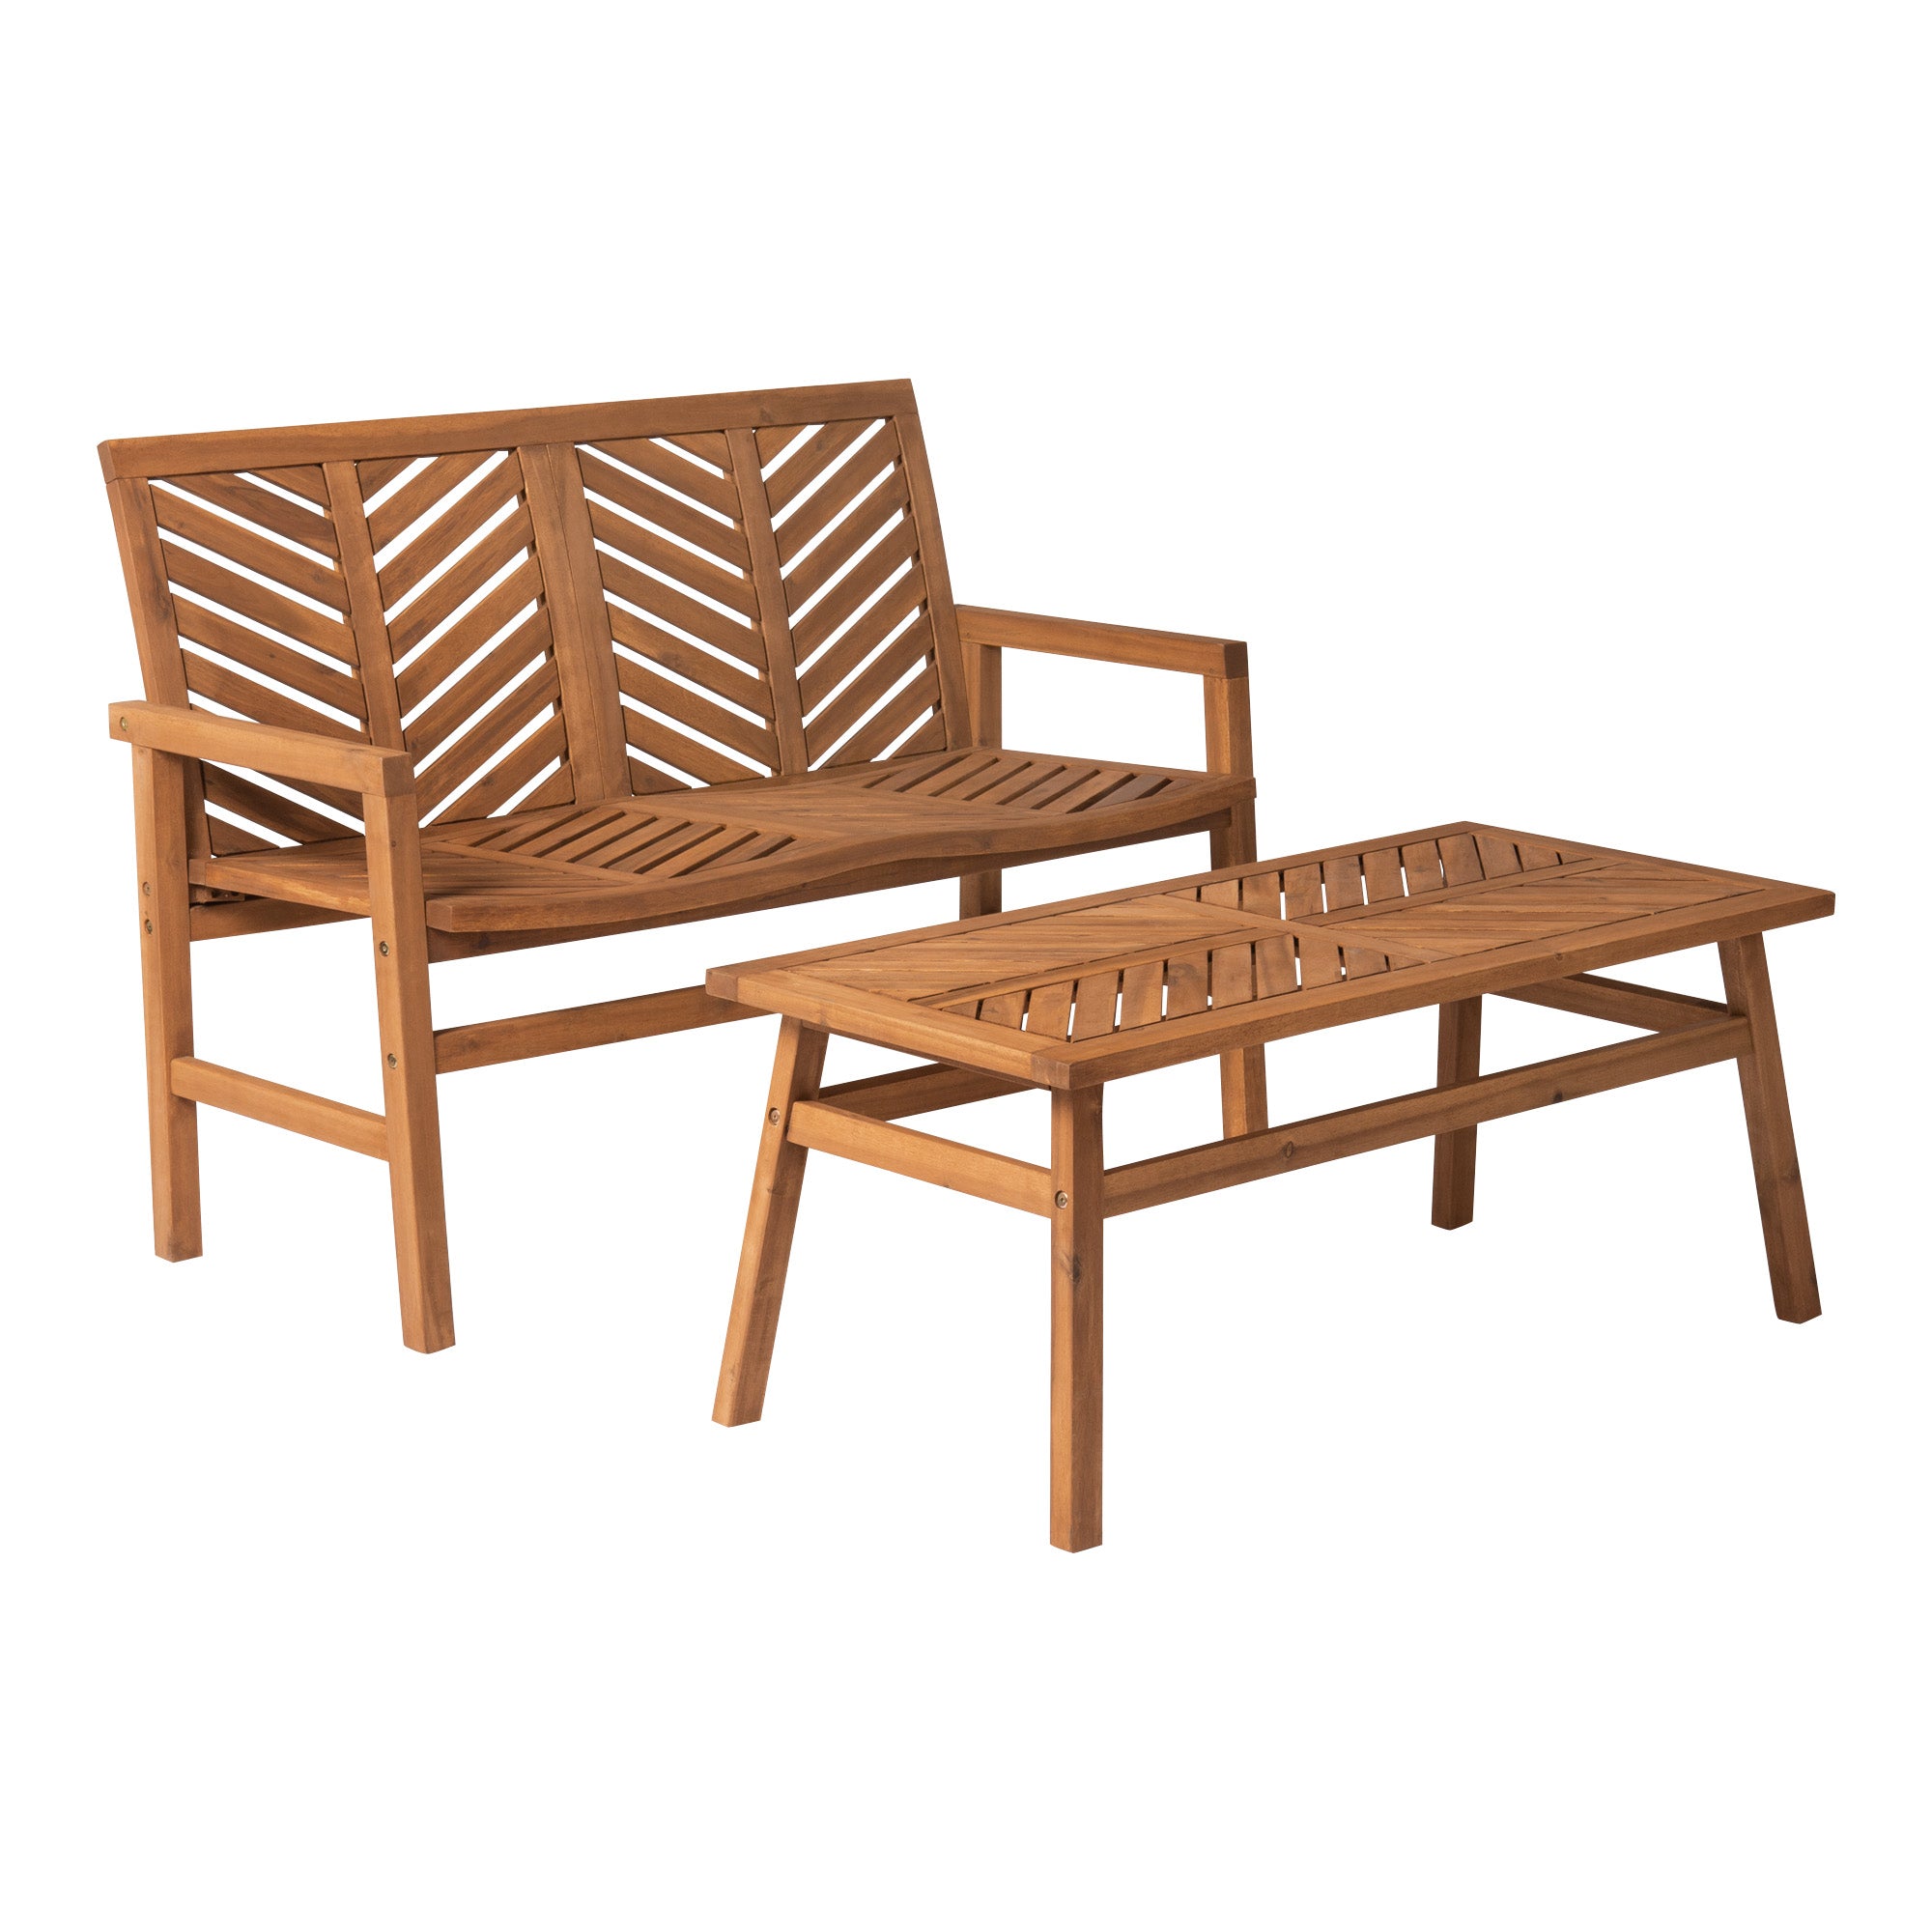 Vincent 2-Piece Chevron Outdoor Patio Chat Set - East Shore Modern Home Furnishings